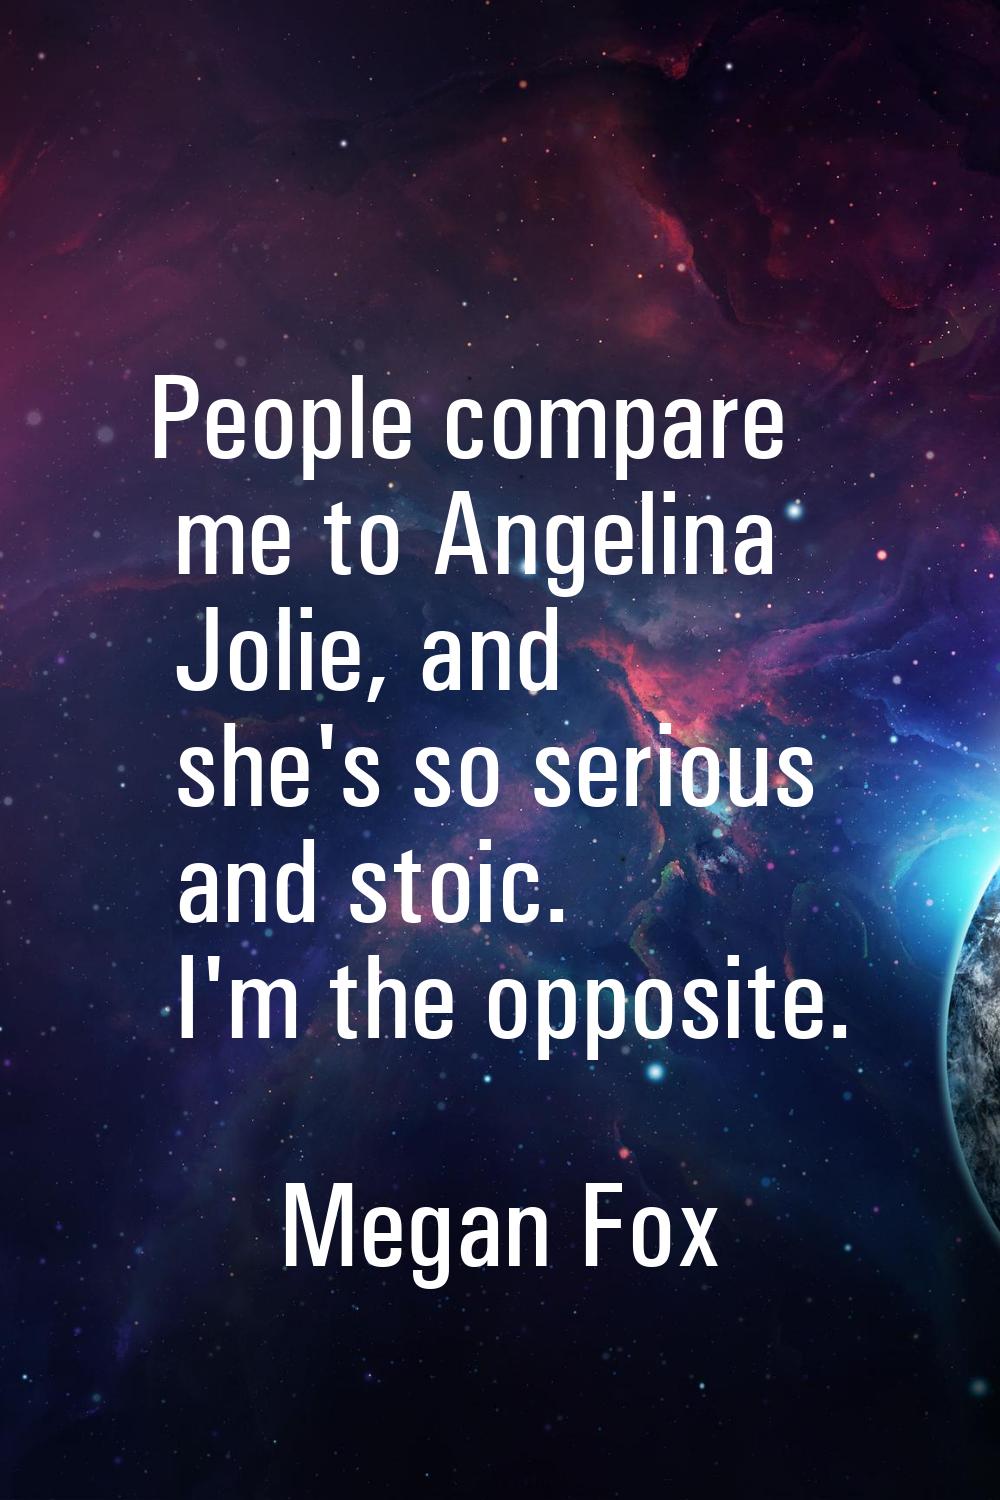 People compare me to Angelina Jolie, and she's so serious and stoic. I'm the opposite.